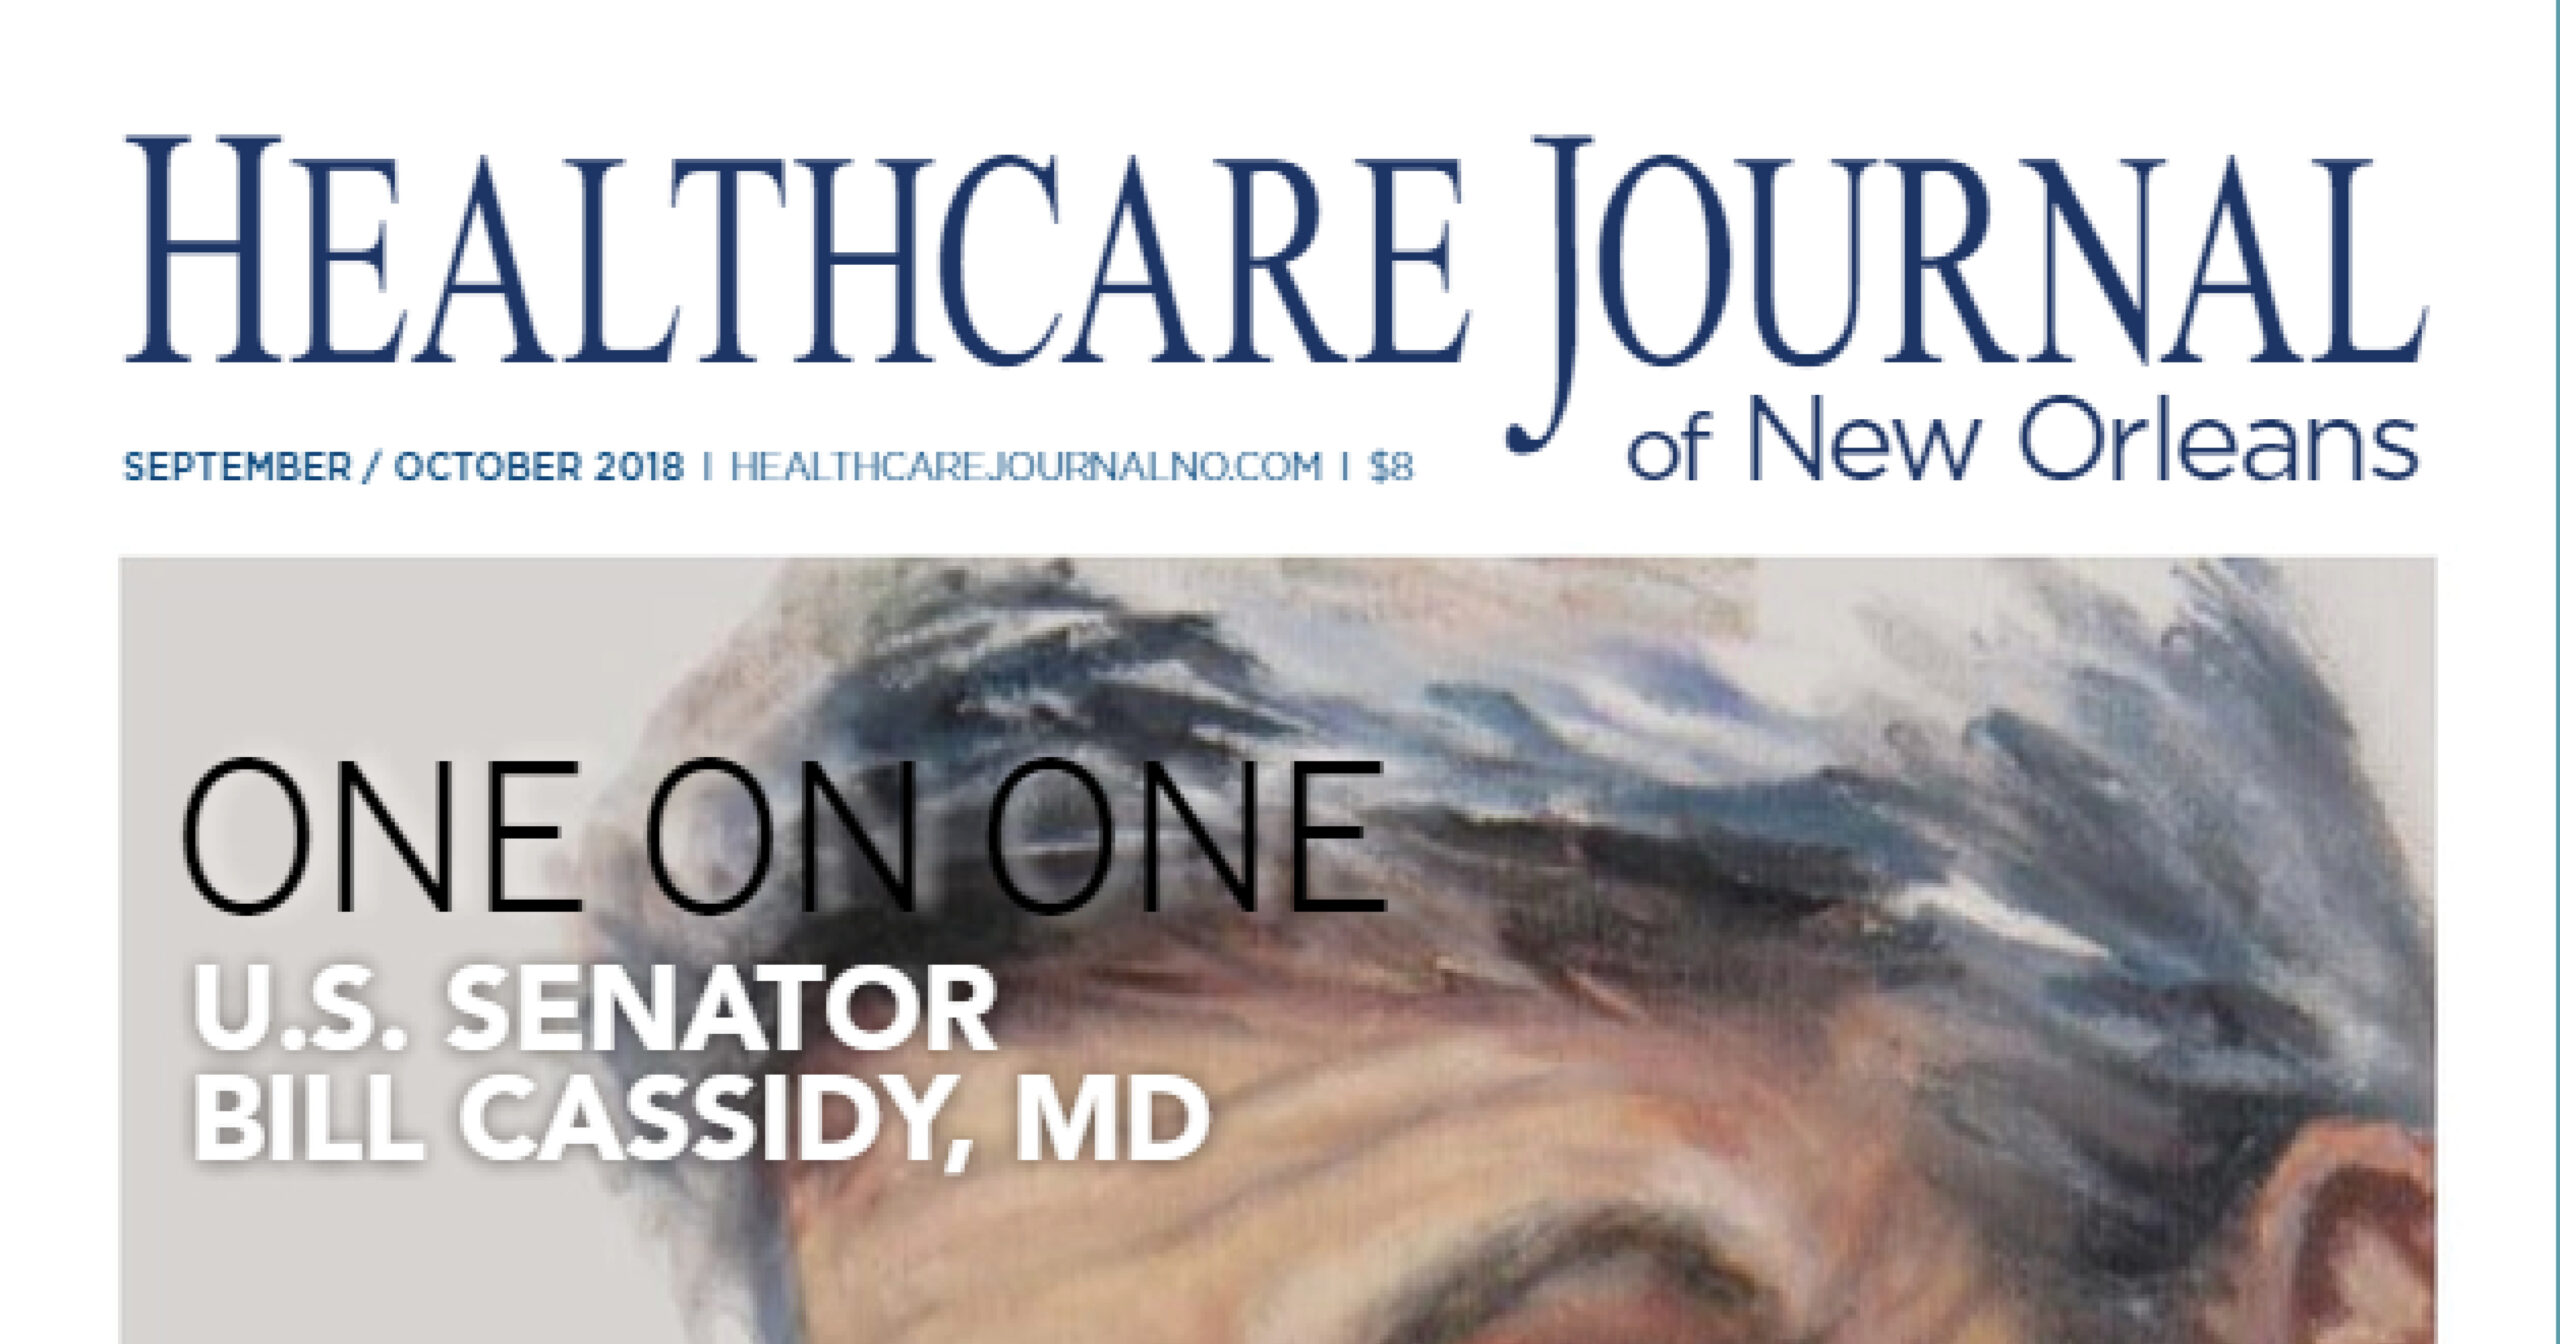 Healthcare Journal of New Orleans Magazine Cover for October 2018 Issue